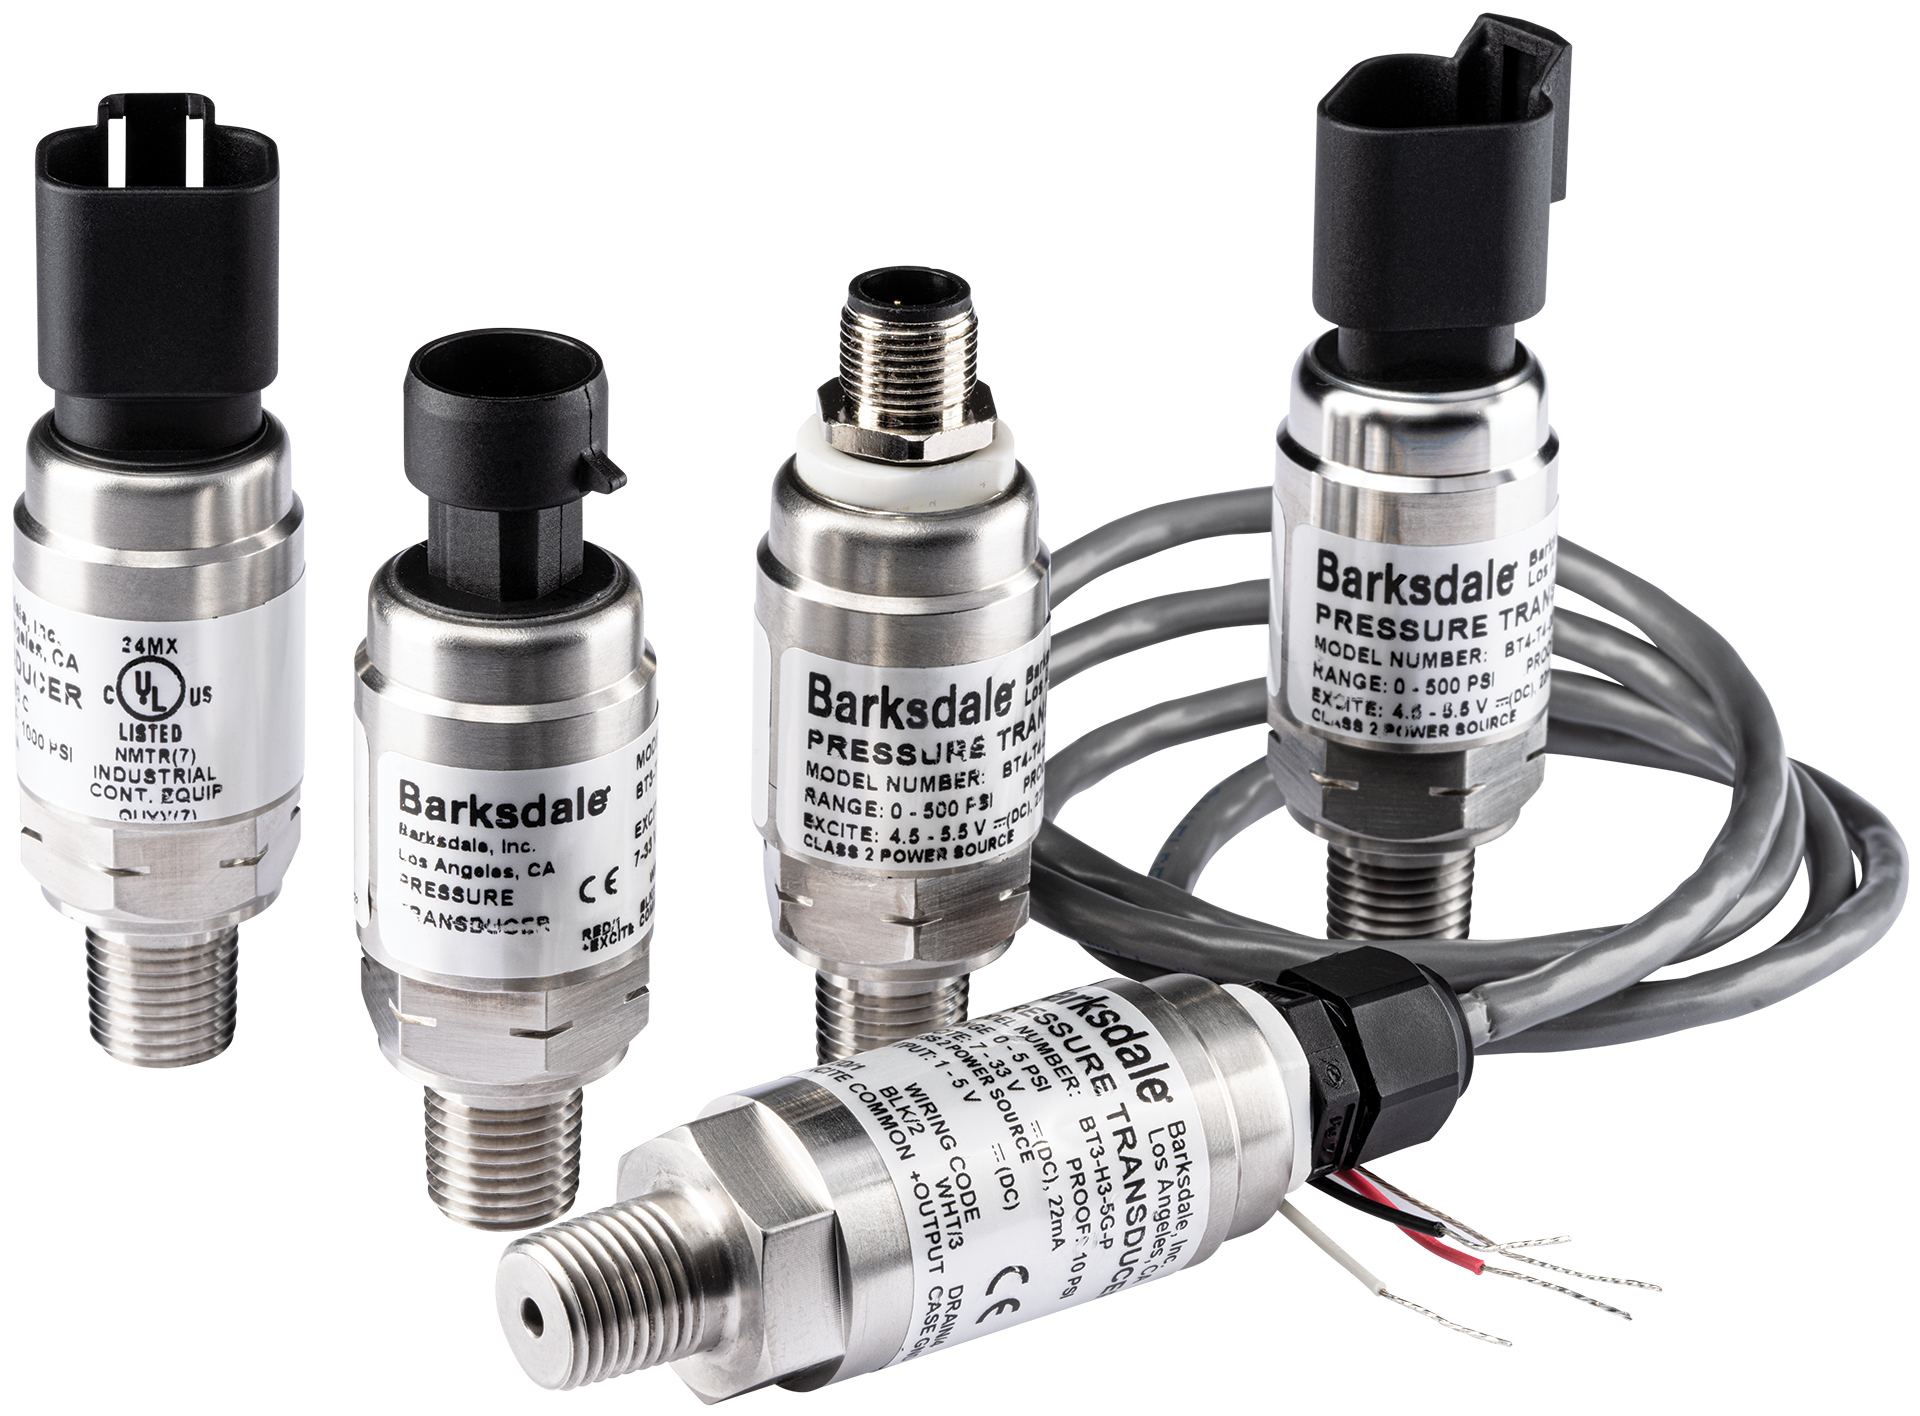 BoT Transducer Series by Barksdale Boosts System Performance & Reliability